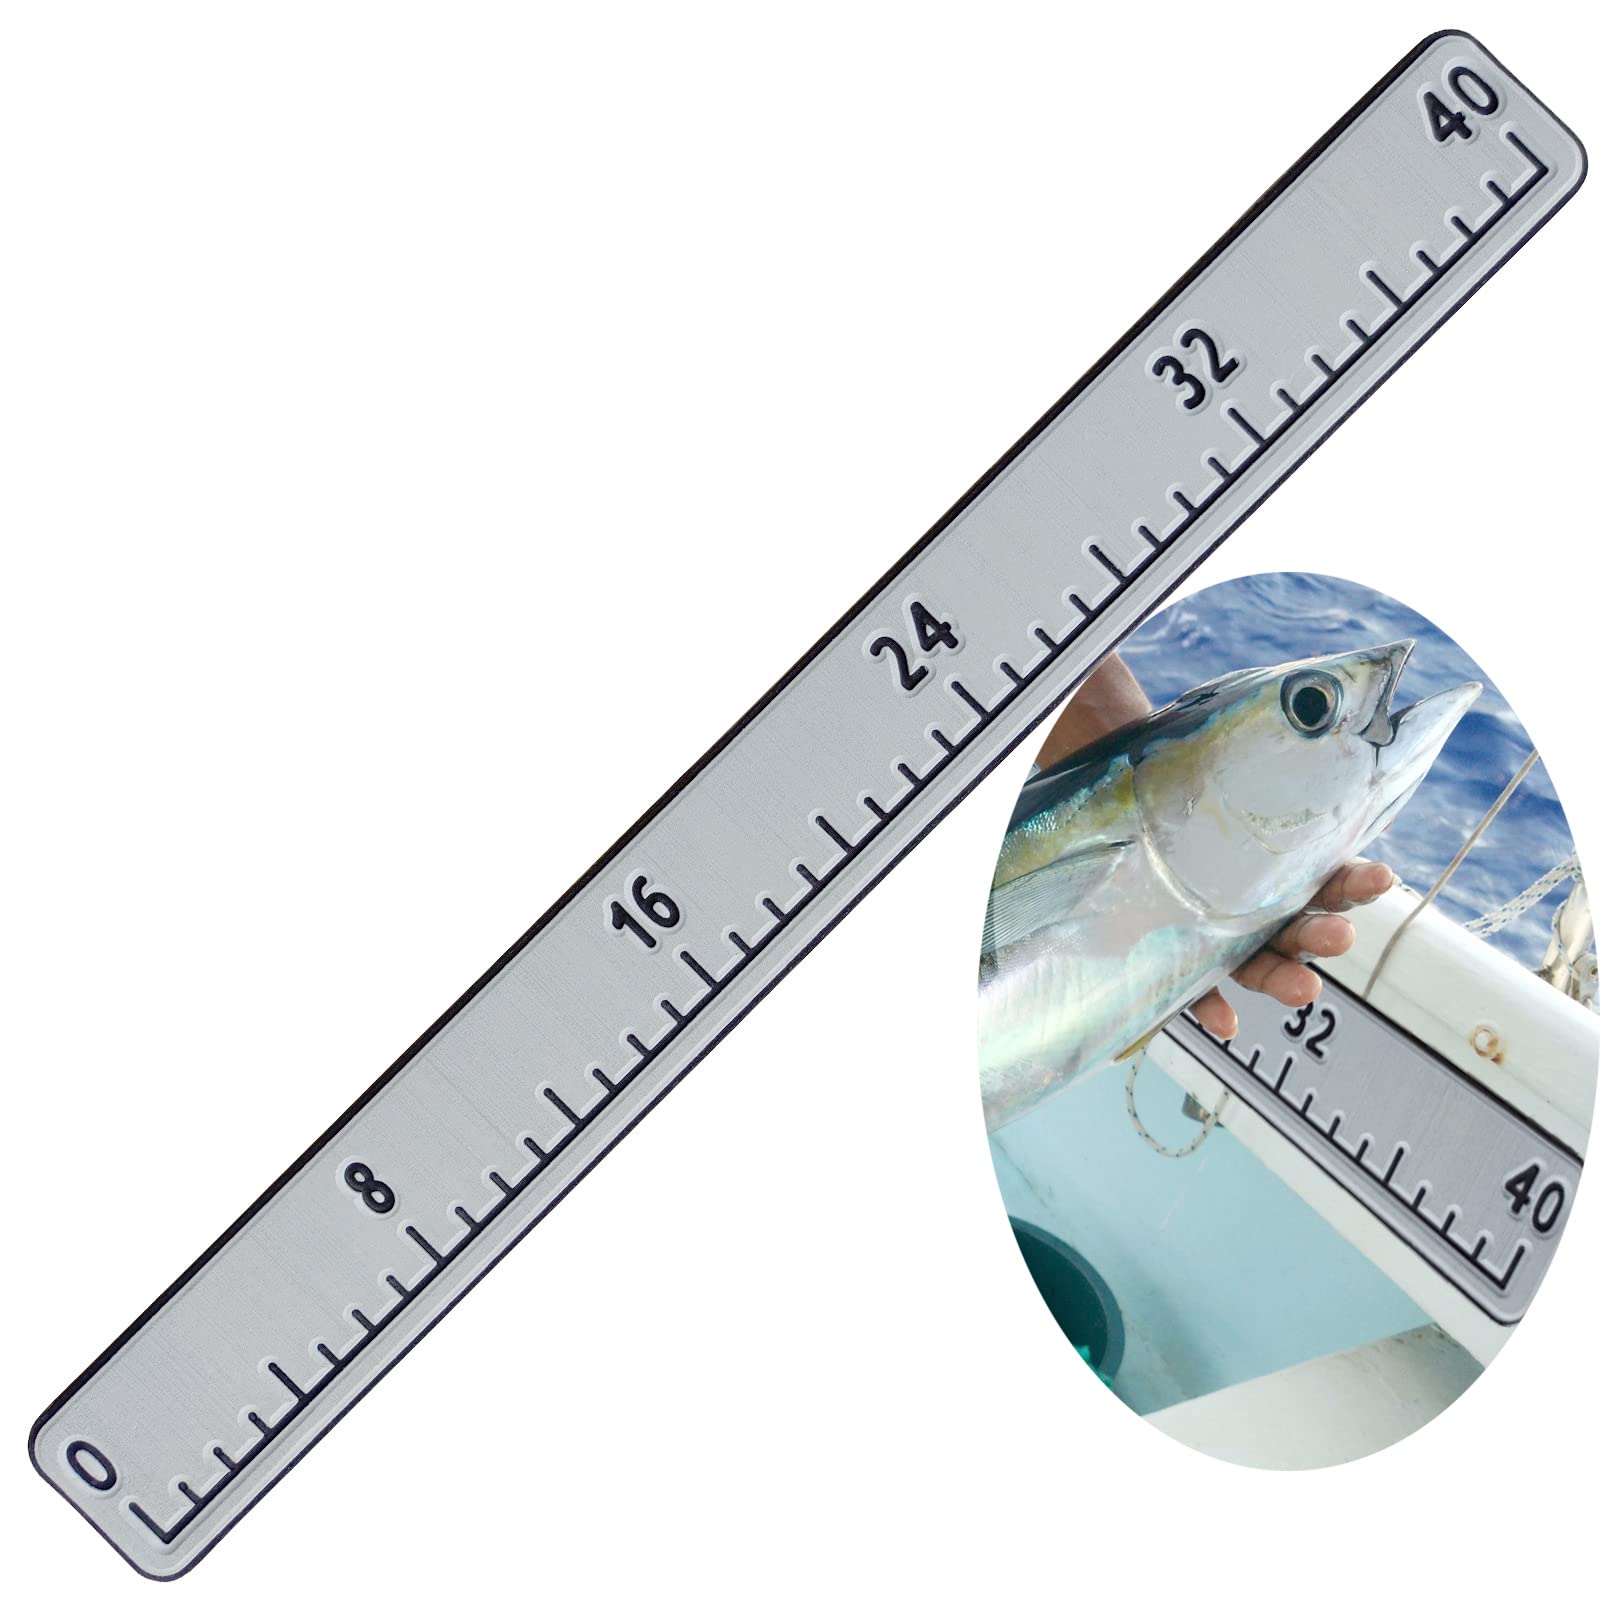 Hzkaicun/Fish Ruler/40/with Backing Adhesive/Fish Measuring Sticker/Foam  Fish Ruler for Boat/Fish Measuring Board/Suitable for/Fish  Boat/Cooler/Kayak/Yacht/Fish Ruler Boat Accessories 40 Light gray